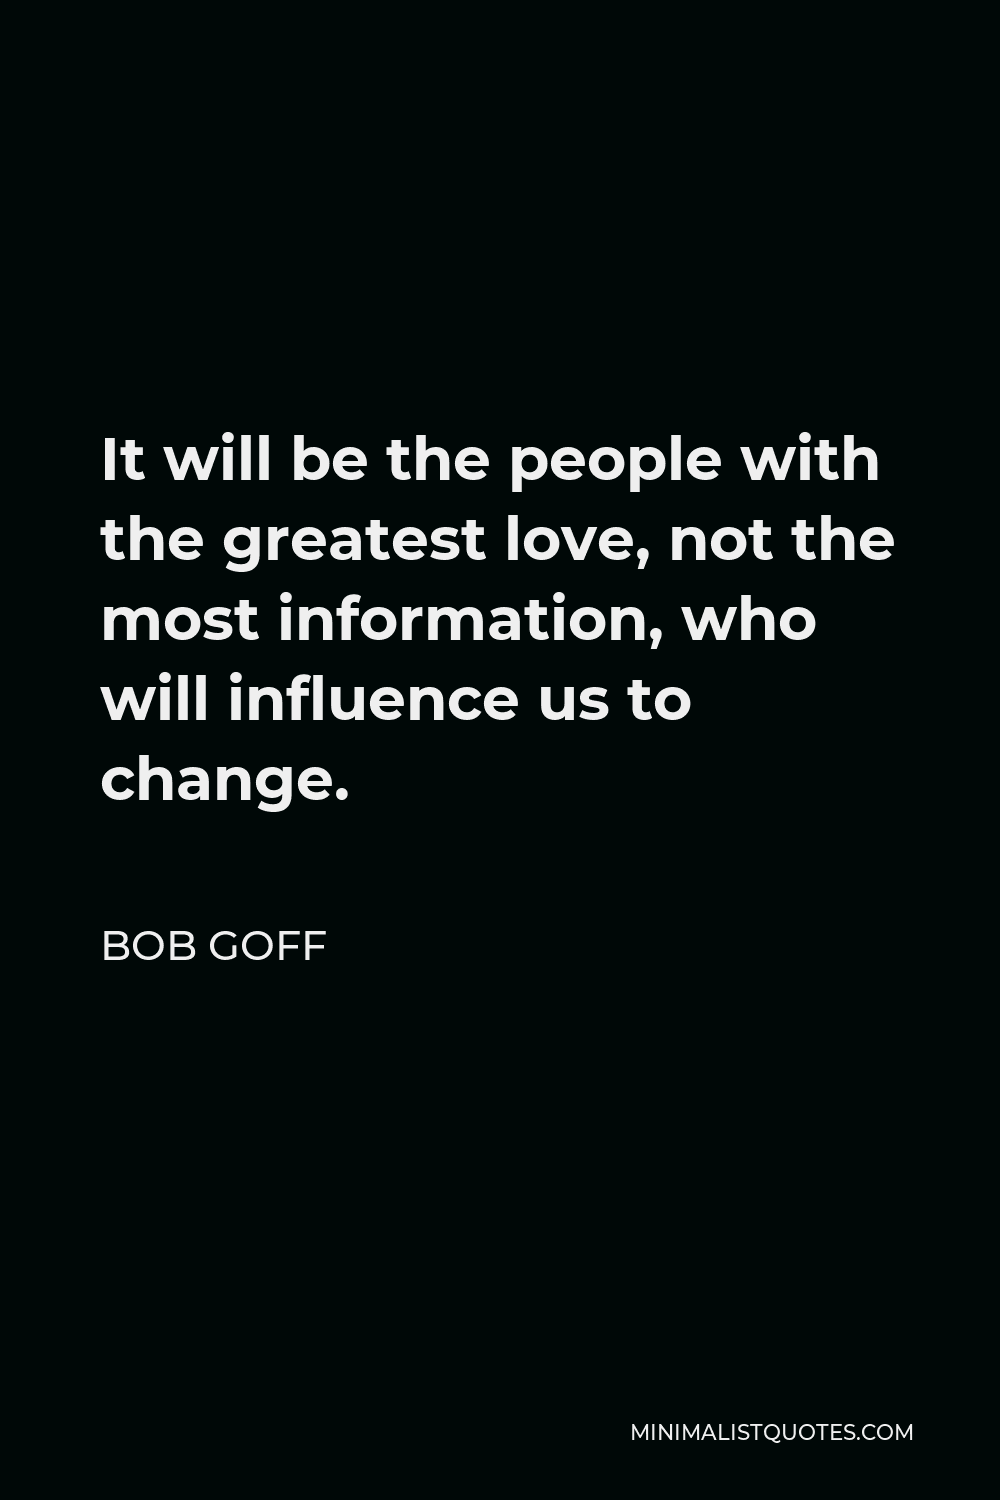 Bob Goff Quote - It will be the people with the greatest love, not the most information, who will influence us to change.